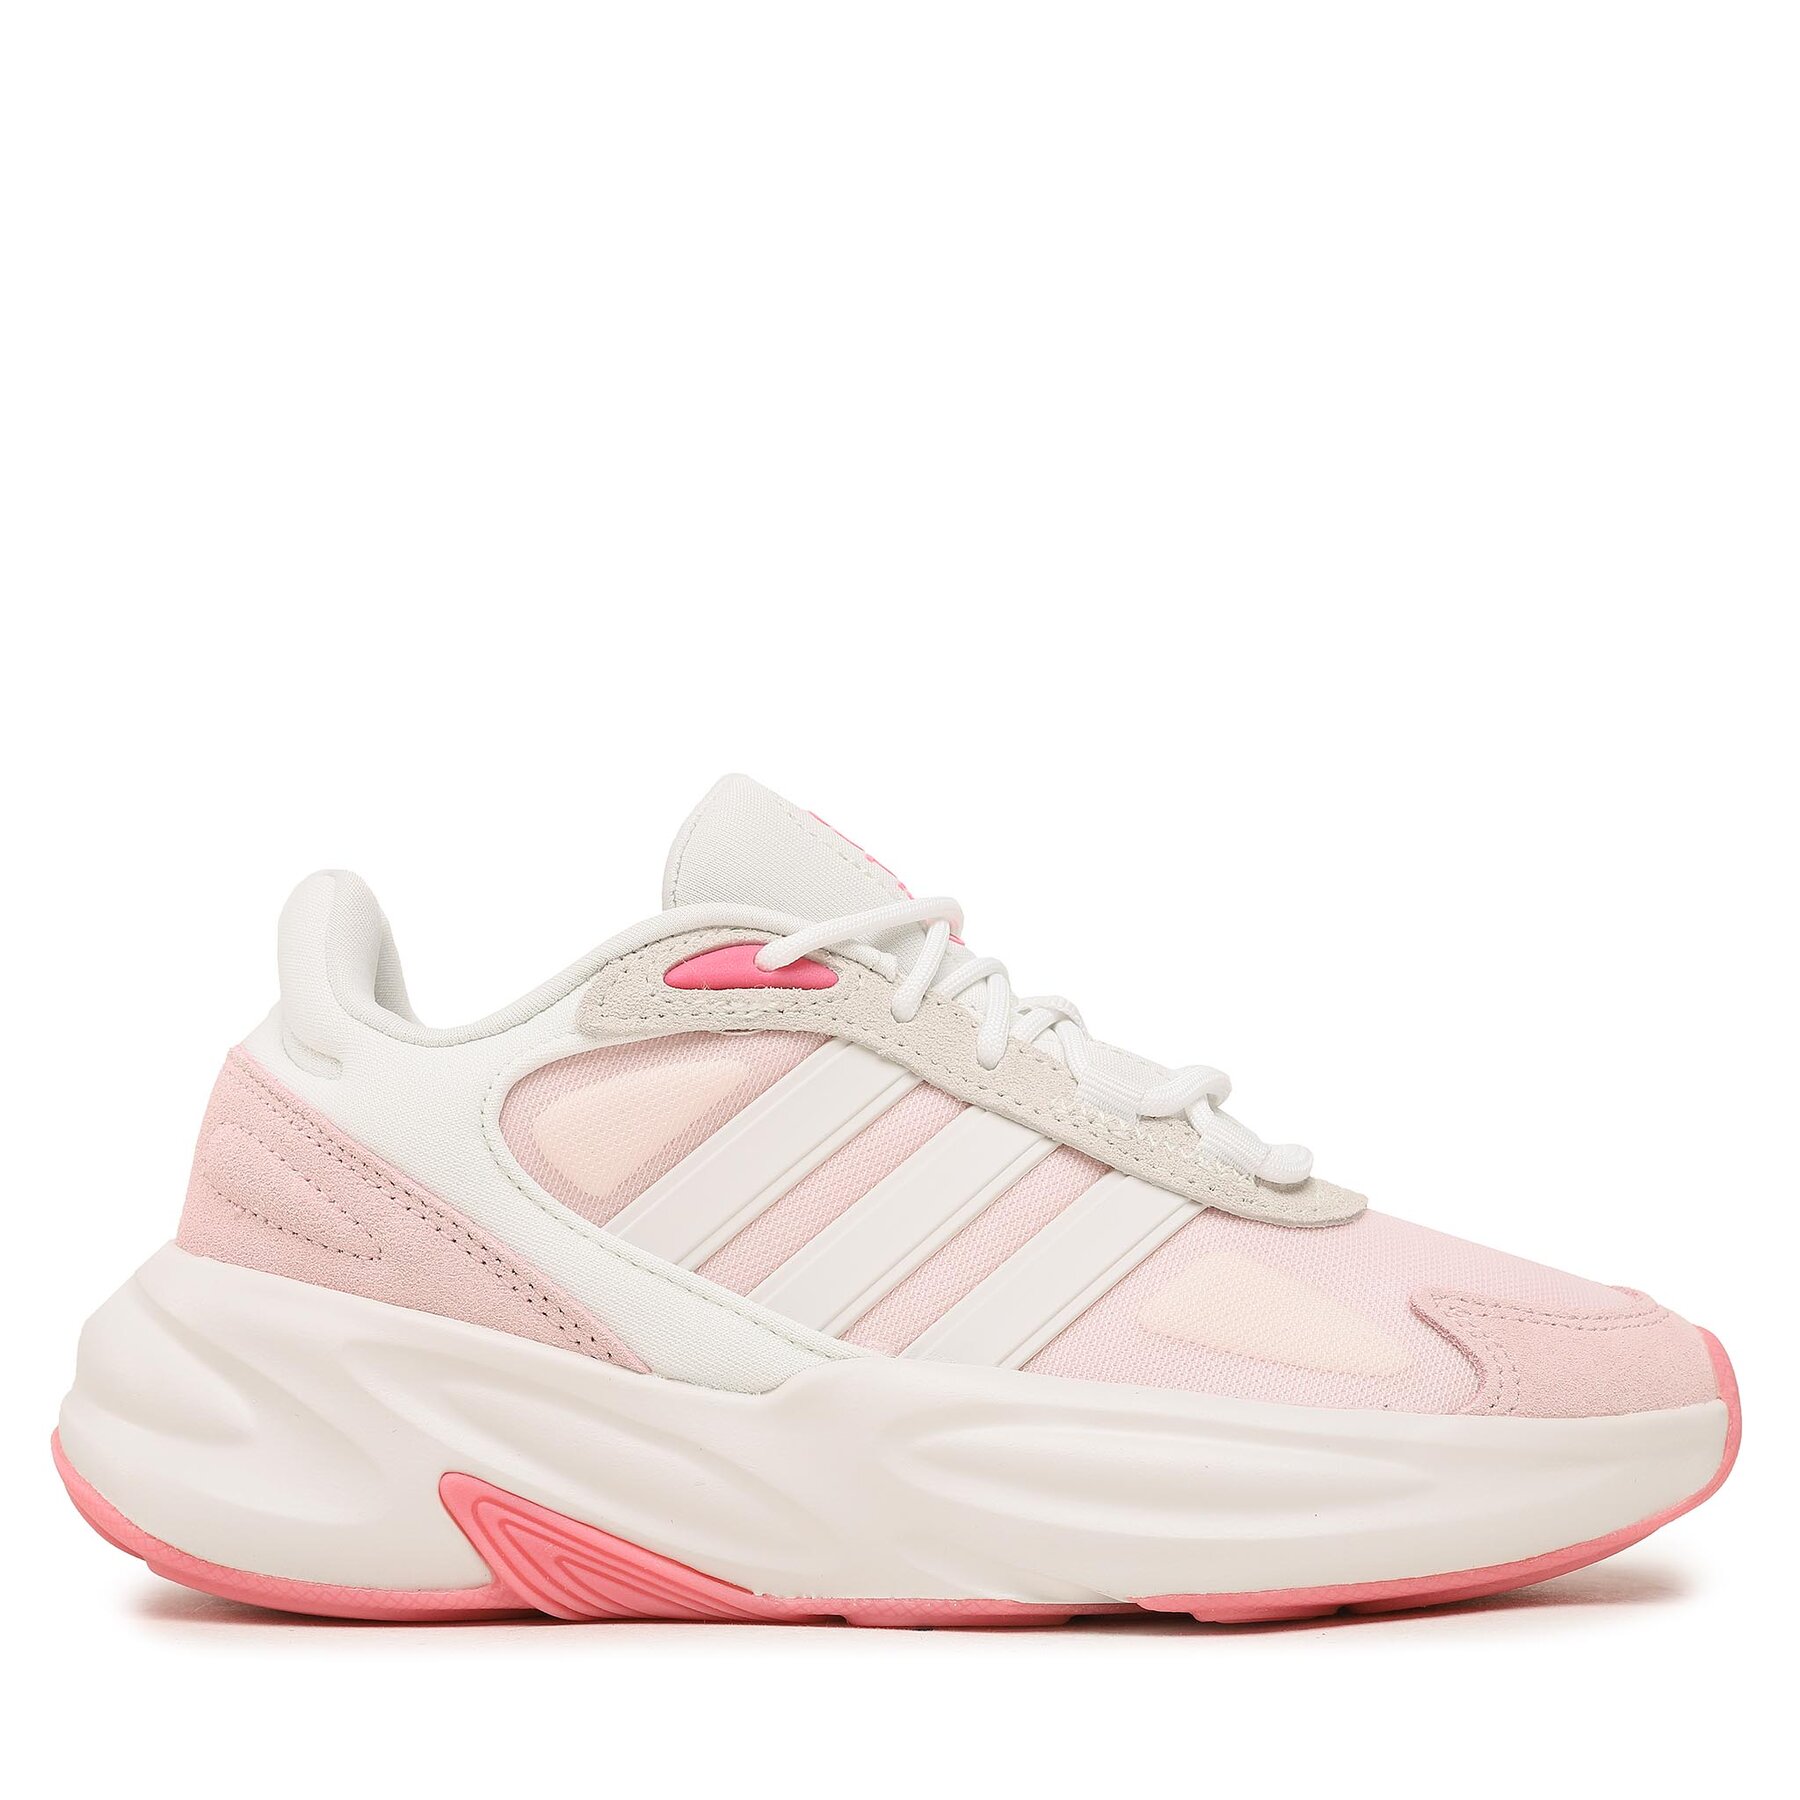 Sneakers adidas Ozelle Cloudfoam Lifestyle Running Shoes IF2876 Rosa von Adidas